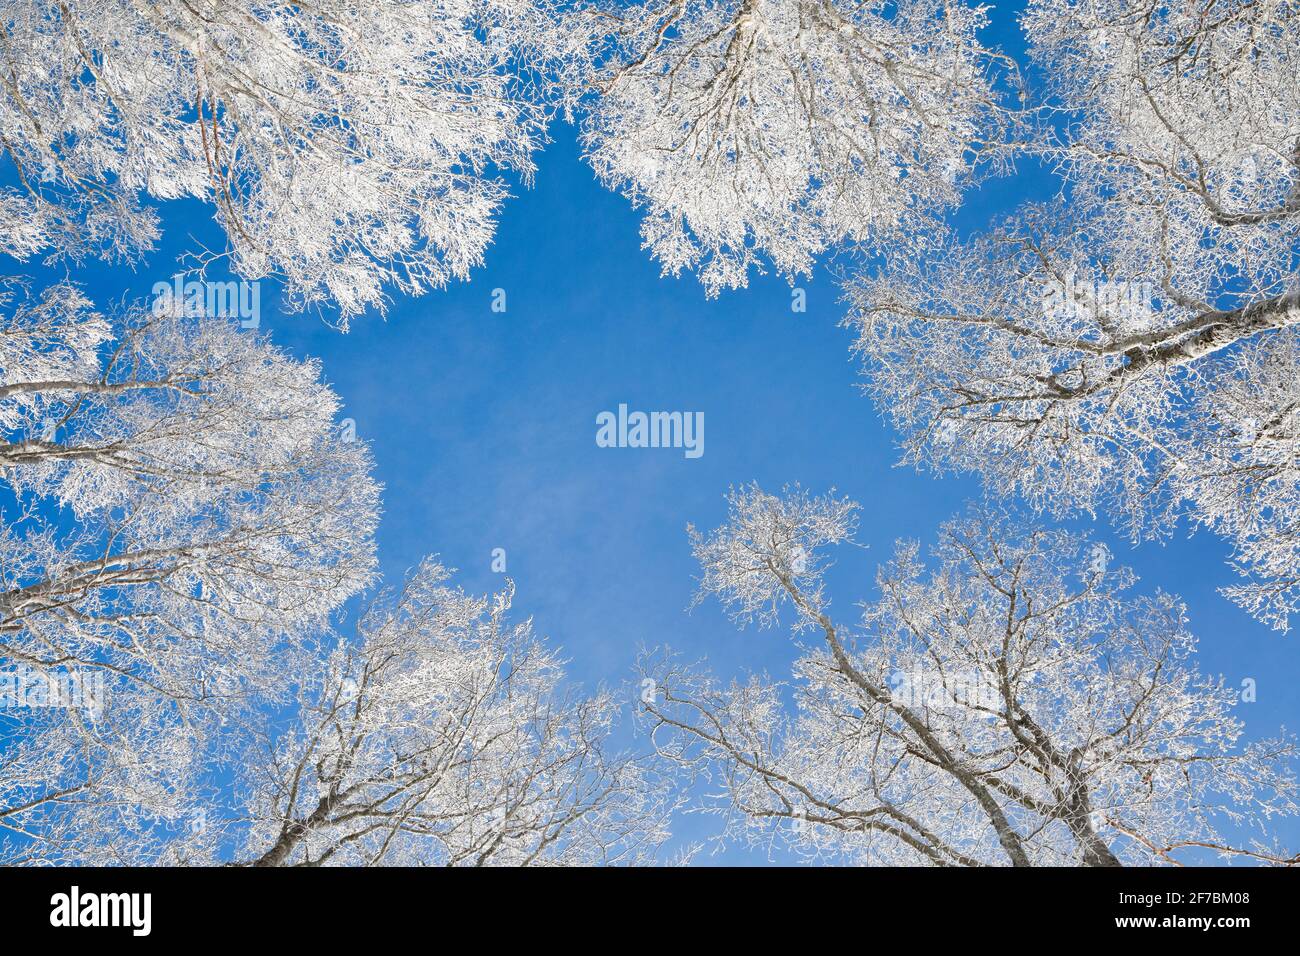 common beech (Fagus sylvatica), tree tops of snow covered beeches in front of blue sky, Switzerland Stock Photo